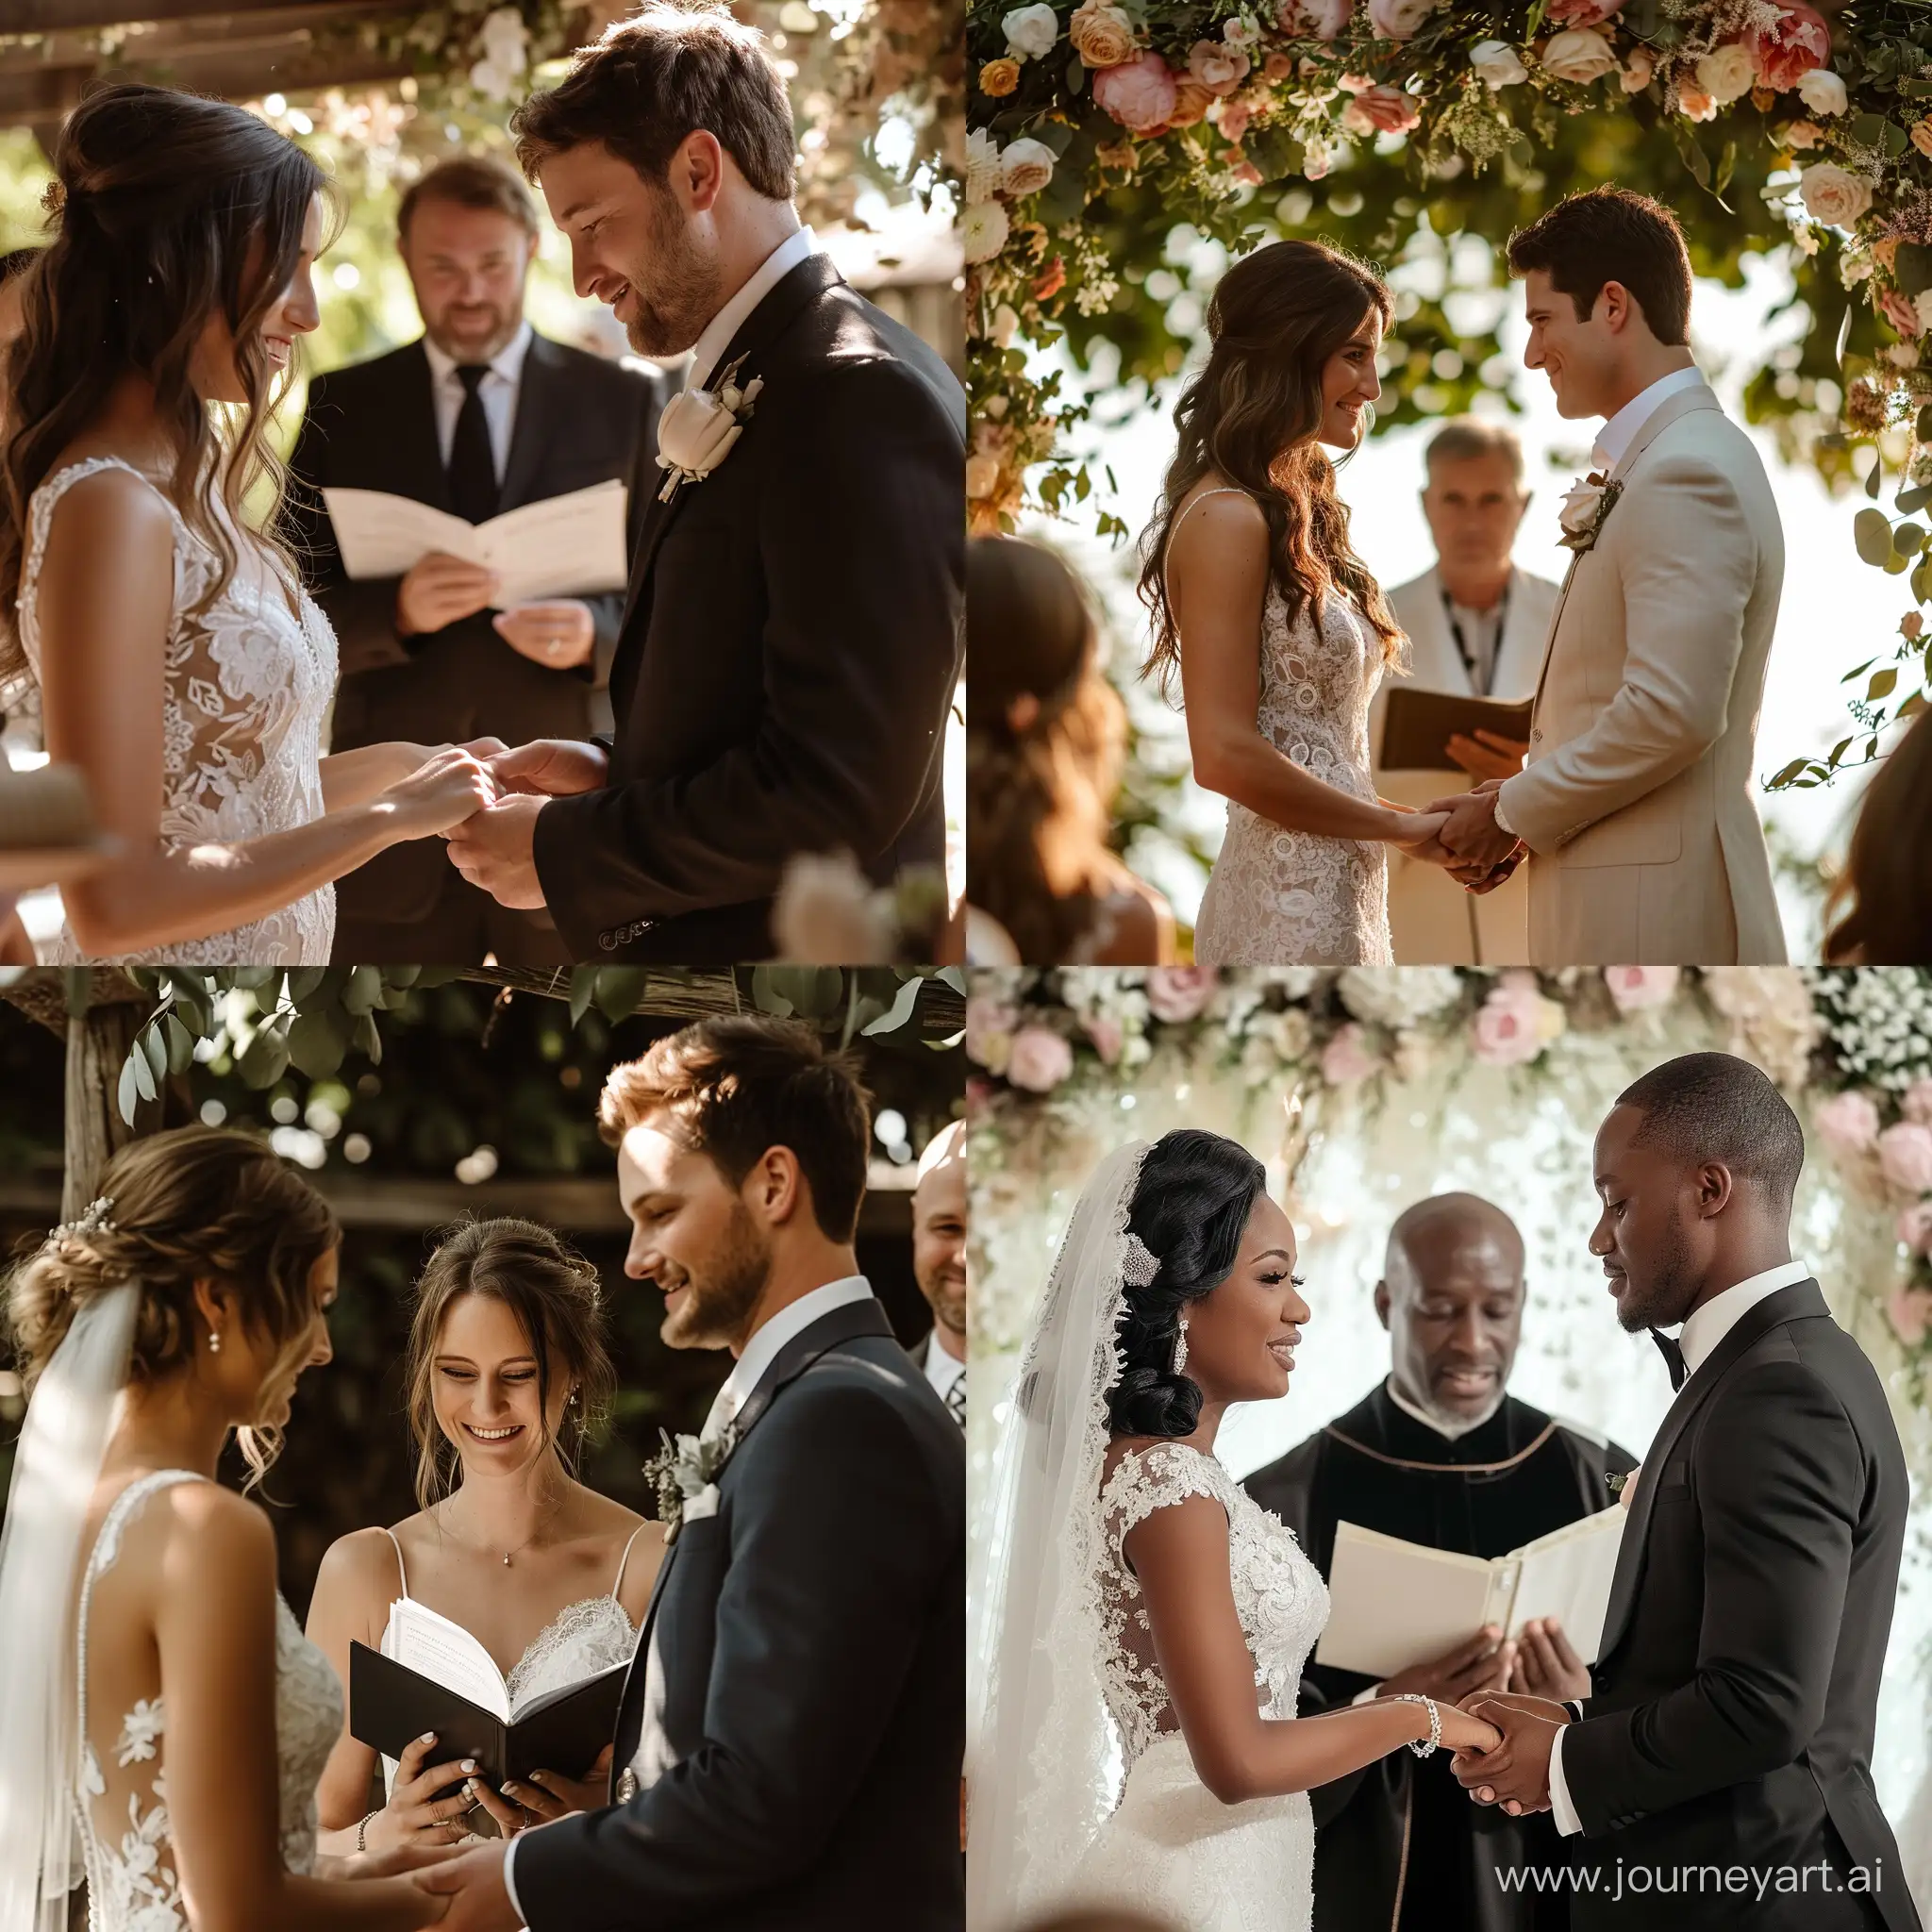 Newlyweds-Exchanging-Vows-Heartwarming-Wedding-Ceremony-Moments